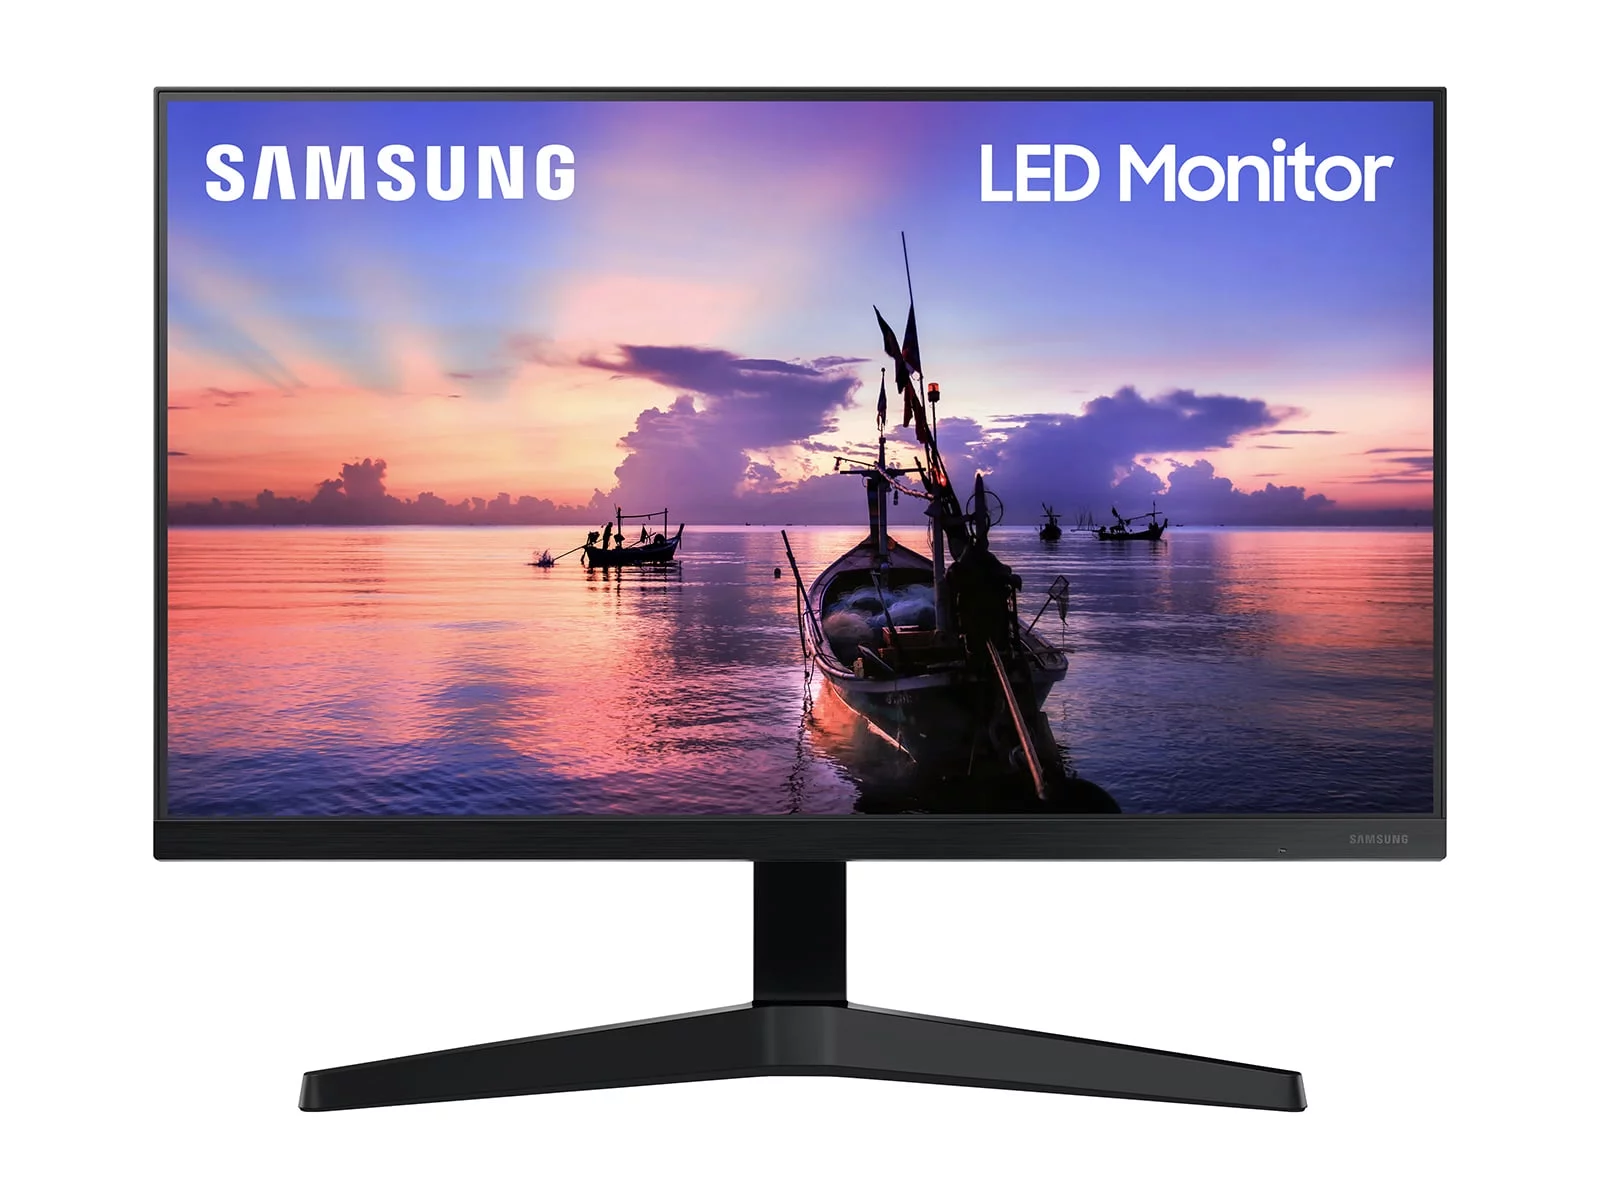 SAMSUNG 27" Class T35F LED Monitor with Border-Less Design, IPS Panel, 75hz, FreeSync, and Eye Saver Mode - LF27T350FHNXZA